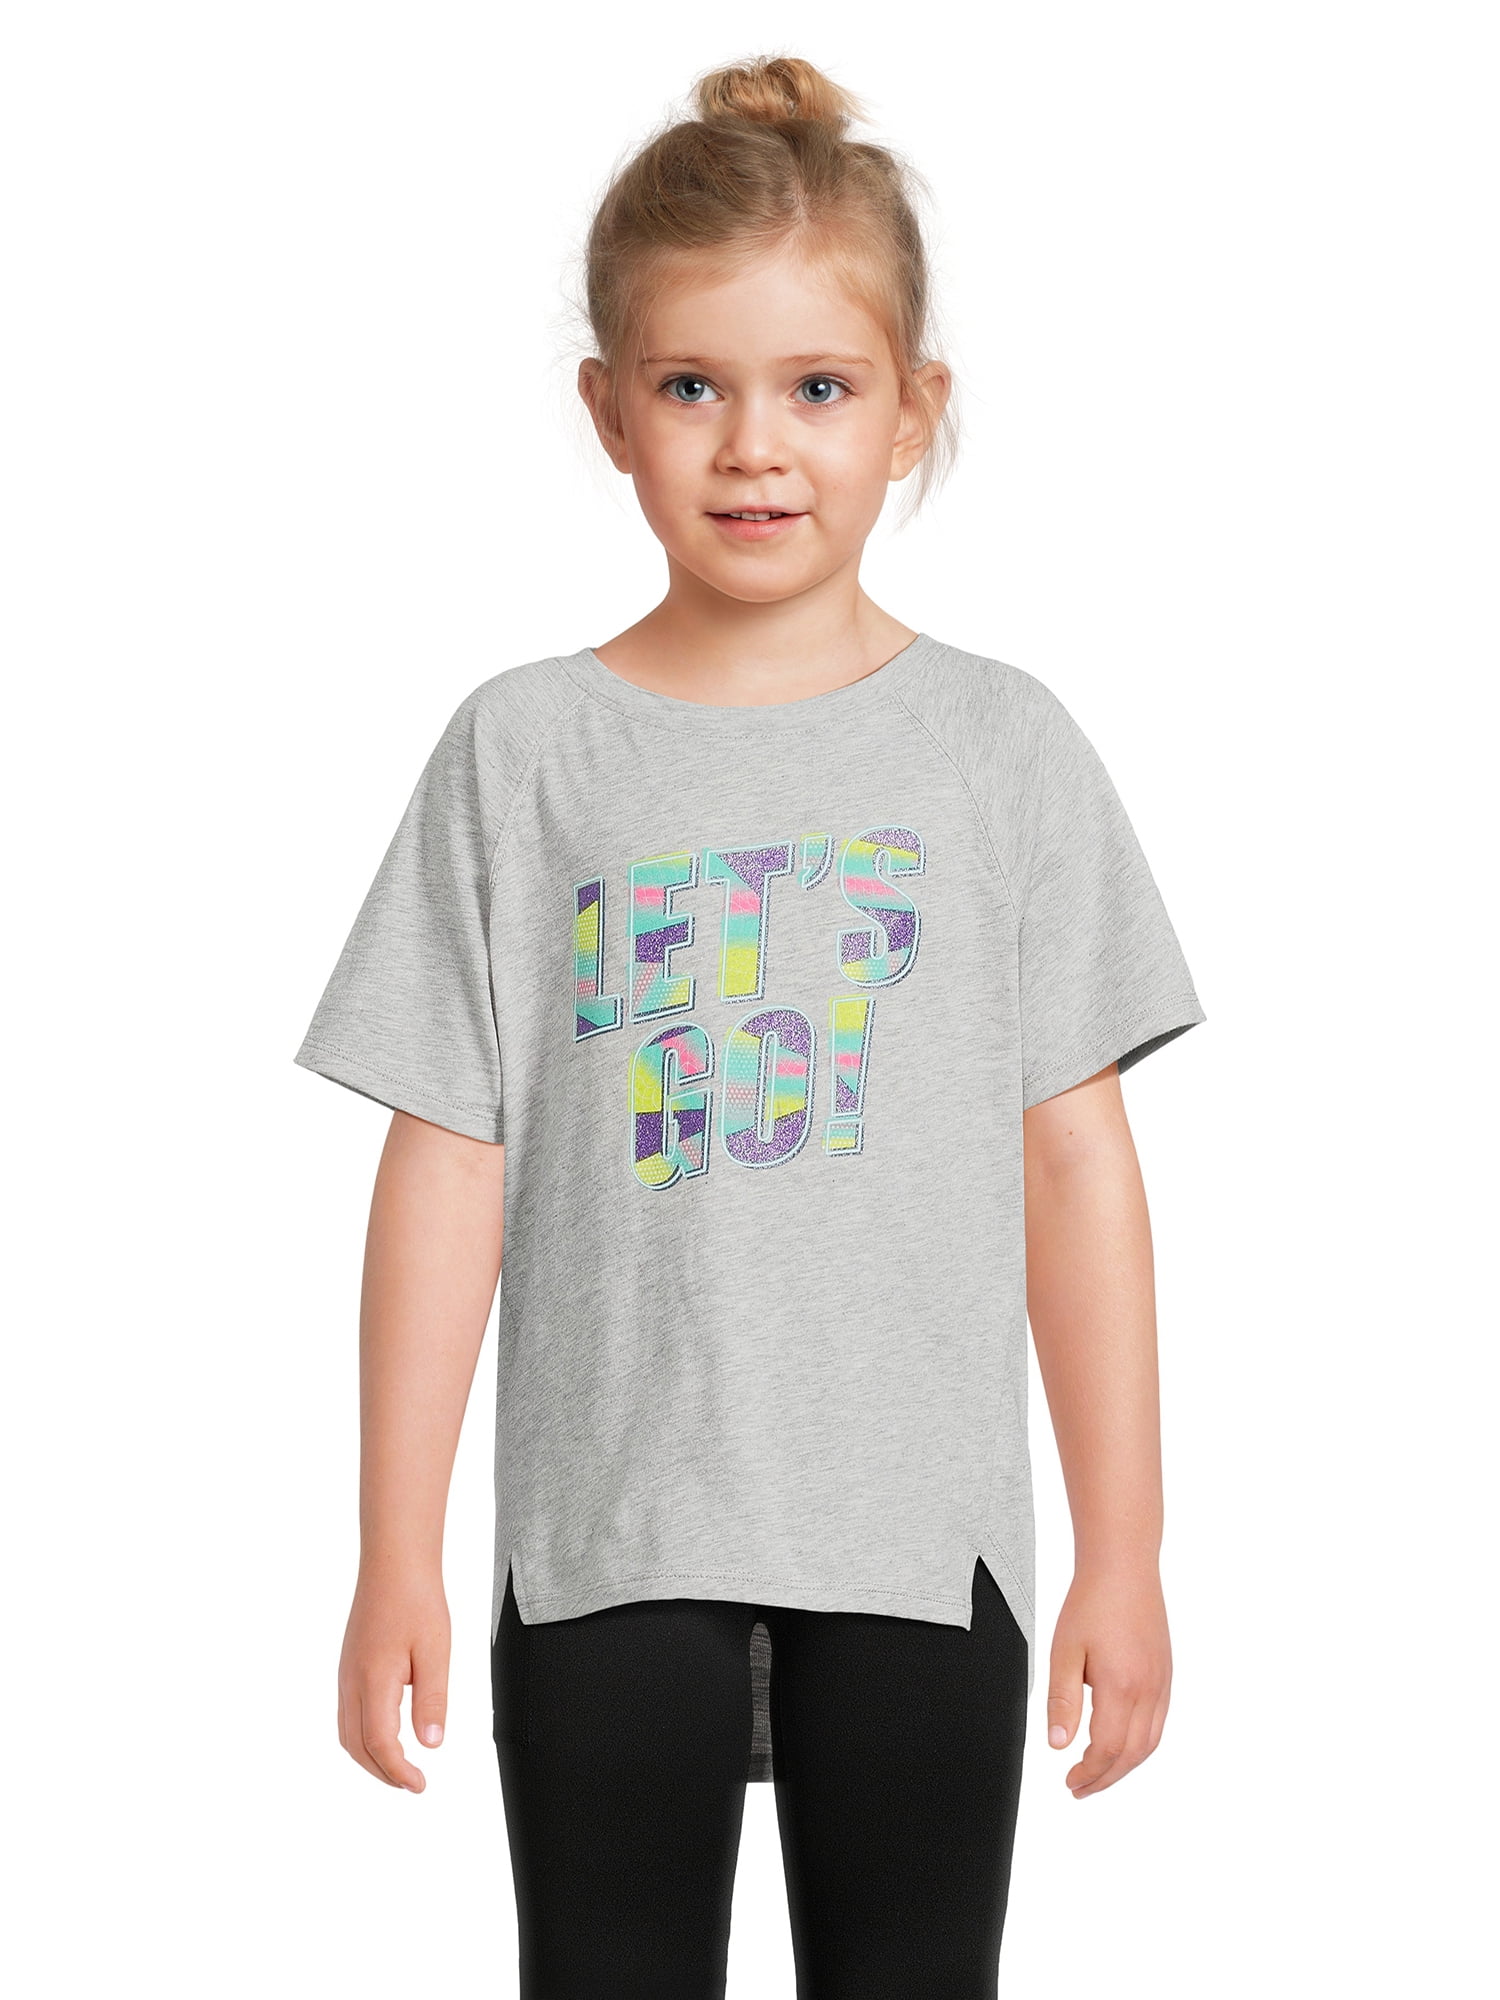 Athletic Works Girls Short Sleeve Graphic Active T-Shirt, Sizes 4-18 ...